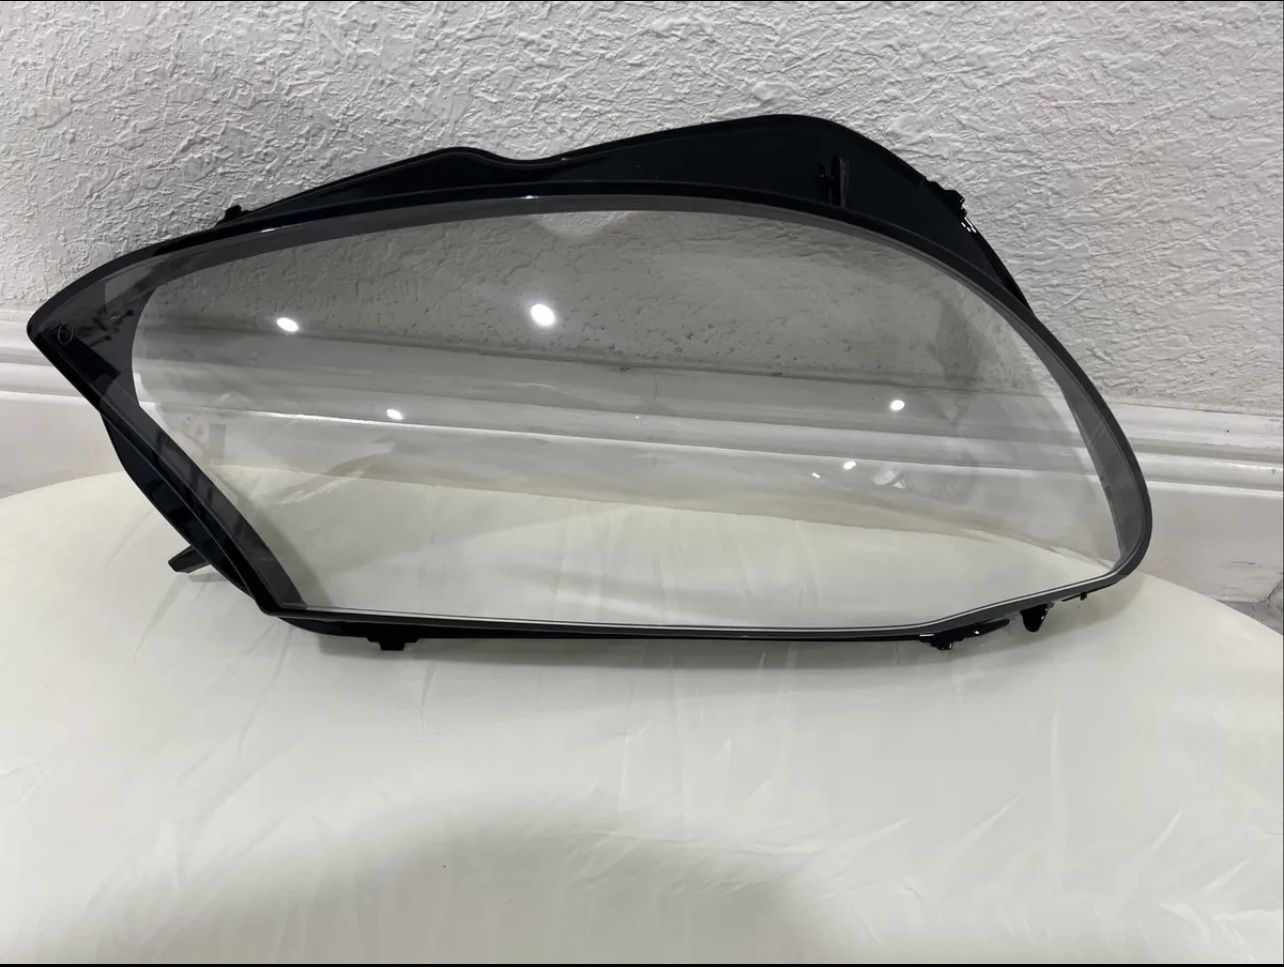 LEFT HEADLIGHT LAMP GLASS LENS FOR Mercedes-Benz C CLASS W(contact info removed)-2020